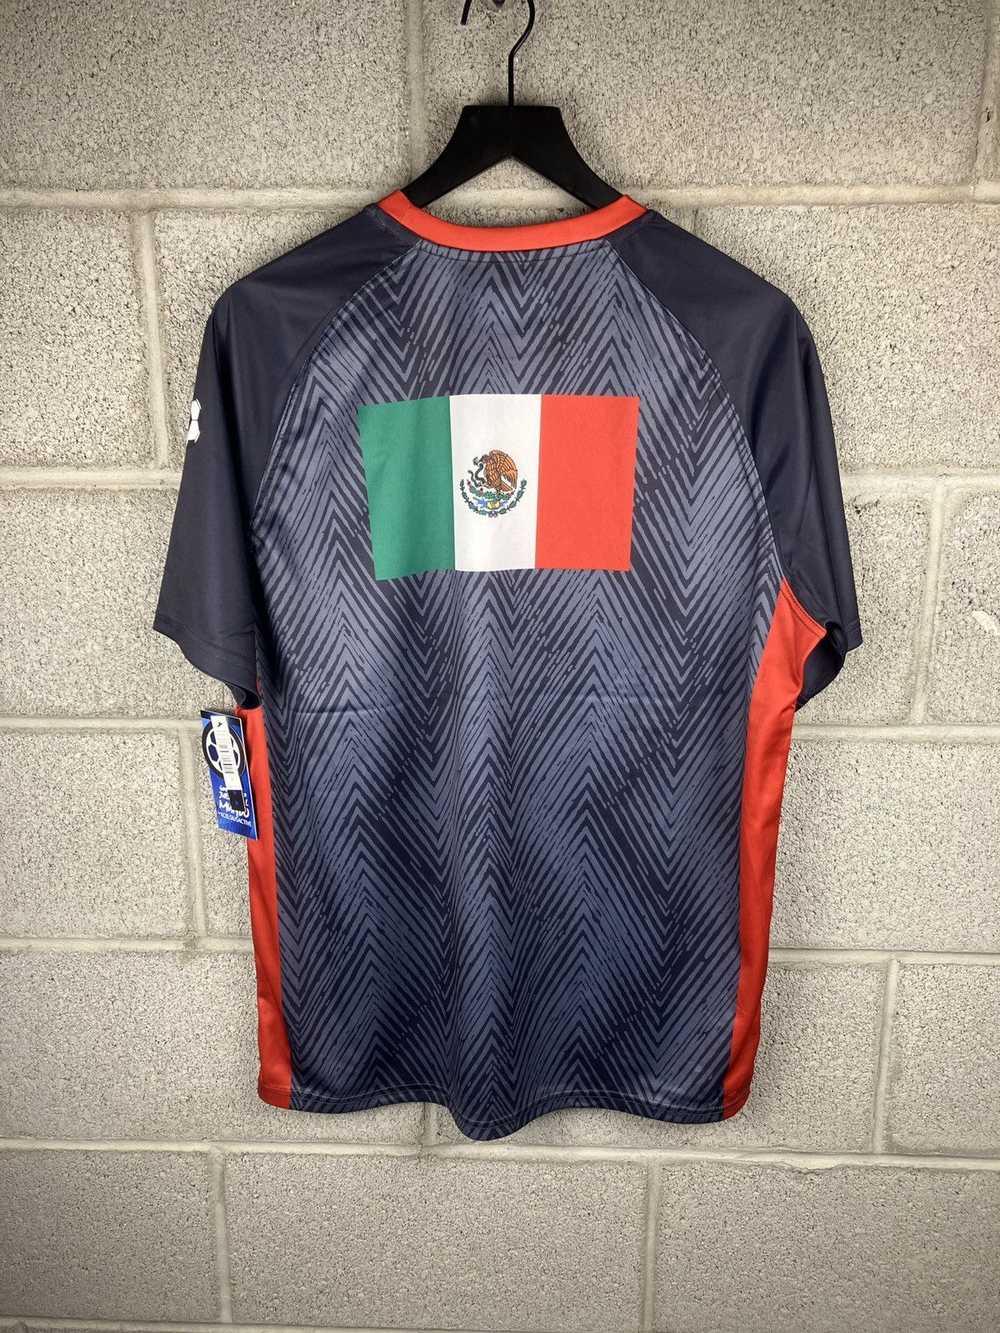 Fifa World Cup × Soccer Jersey × Streetwear Mexic… - image 2